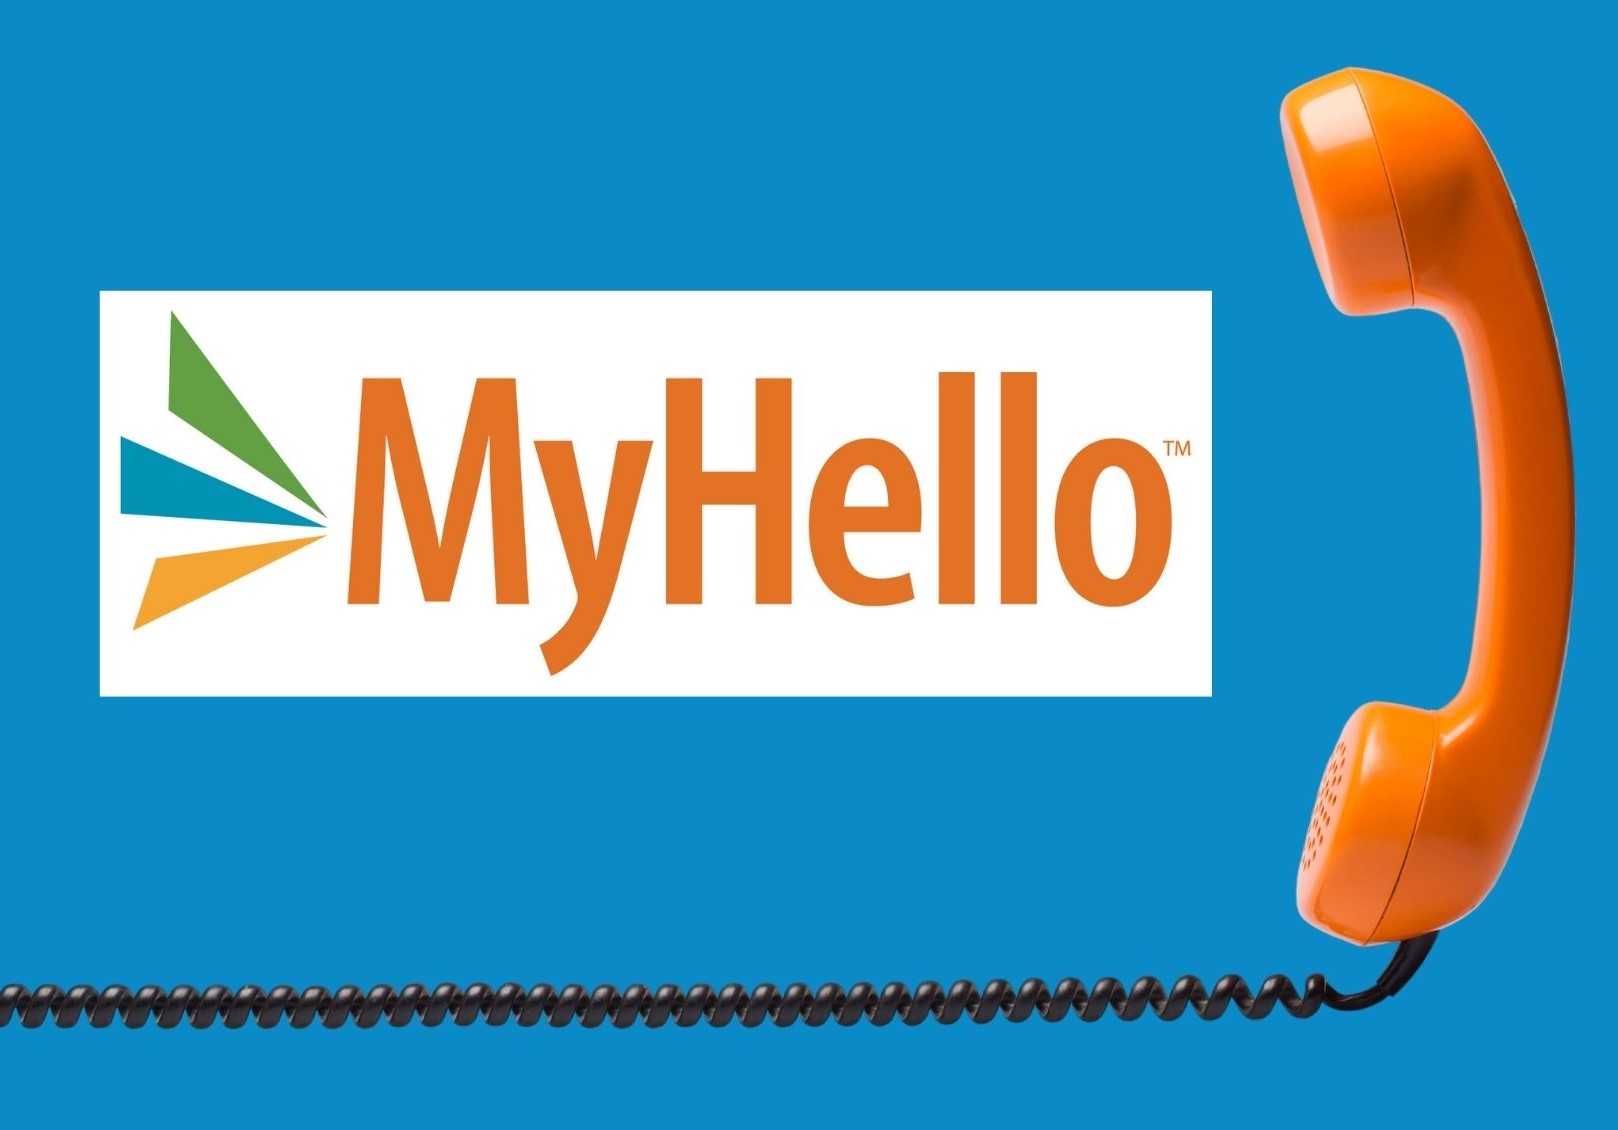 MyHello Helps Fight Loneliness